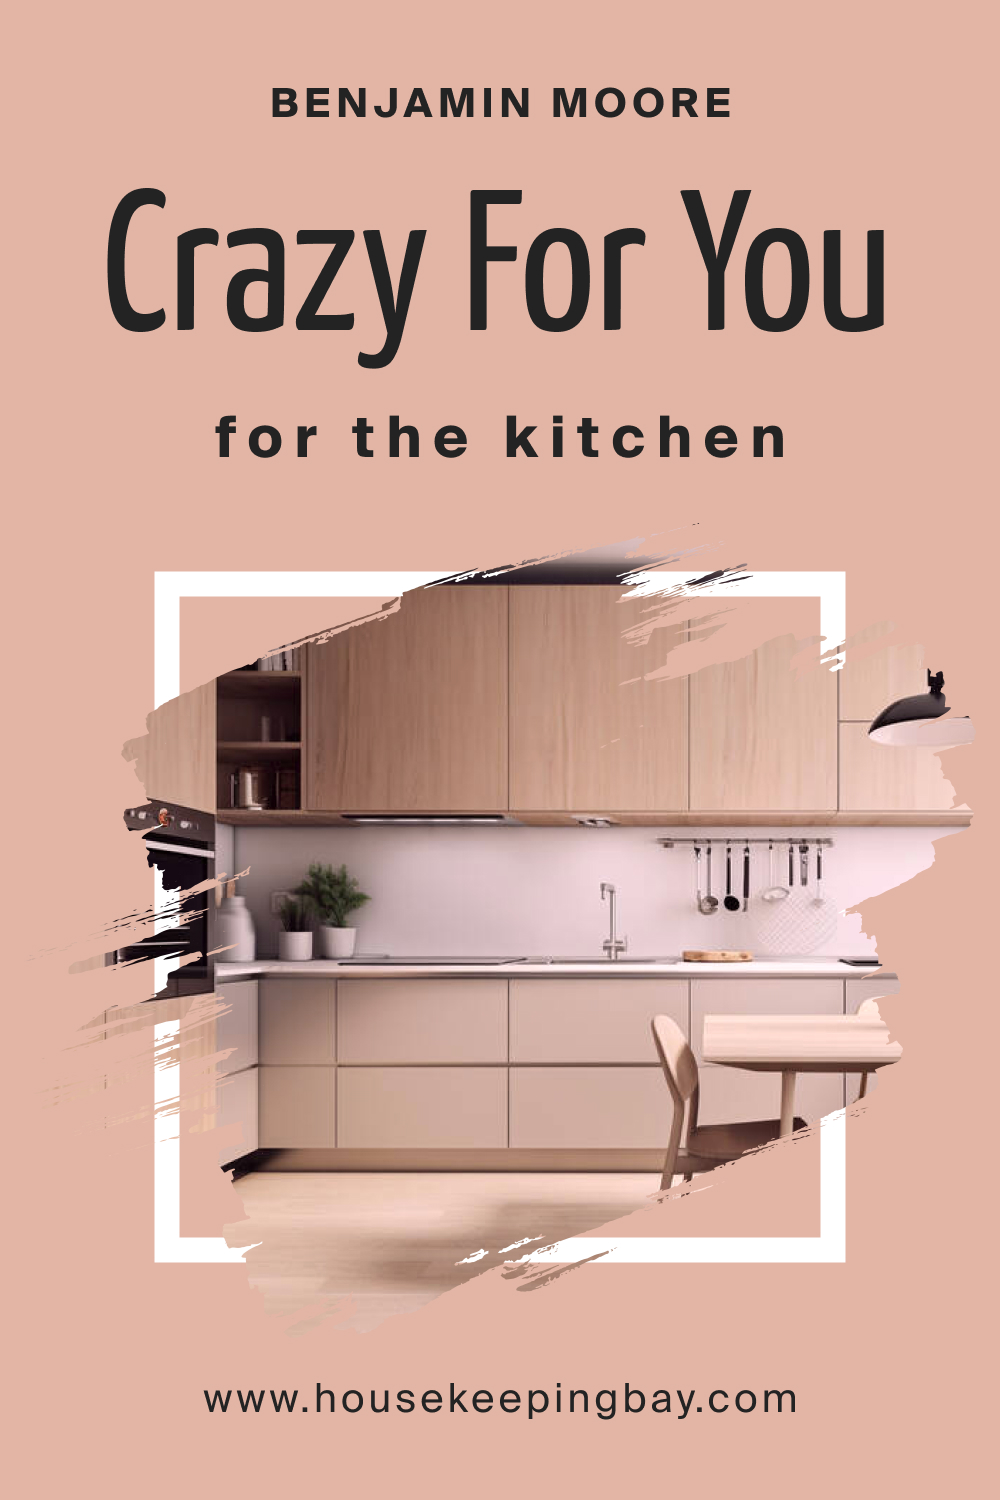 Benjamin Moore. BM Crazy For You 053 for the Kitchen